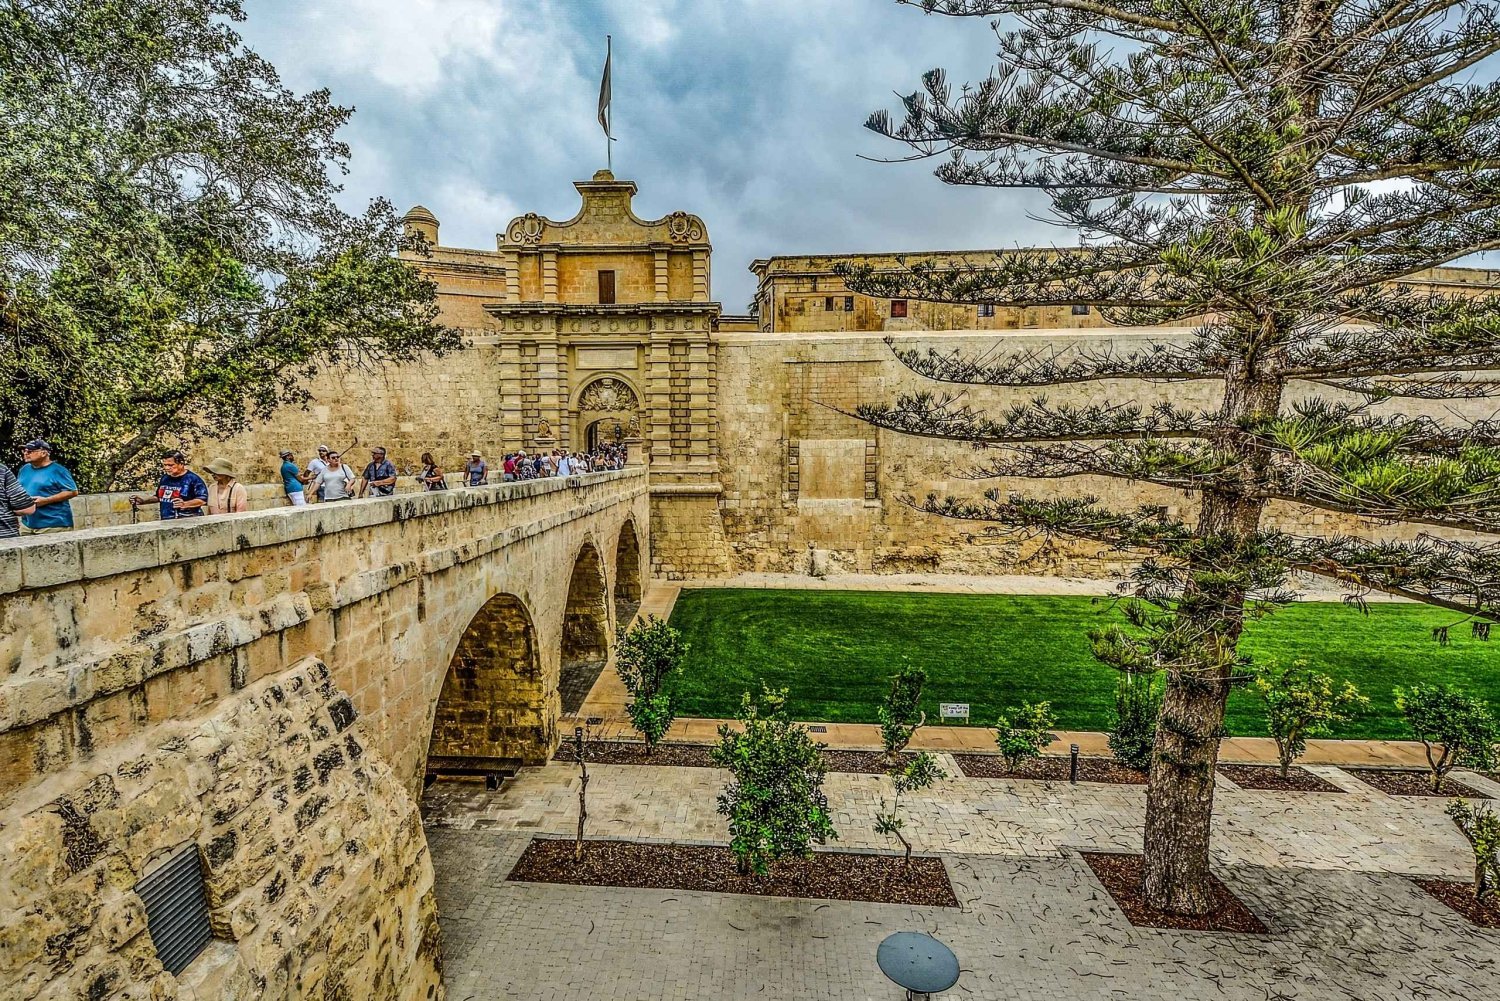 Malta: Highlights of Malta & Mdina Full Day Tour with Lunch